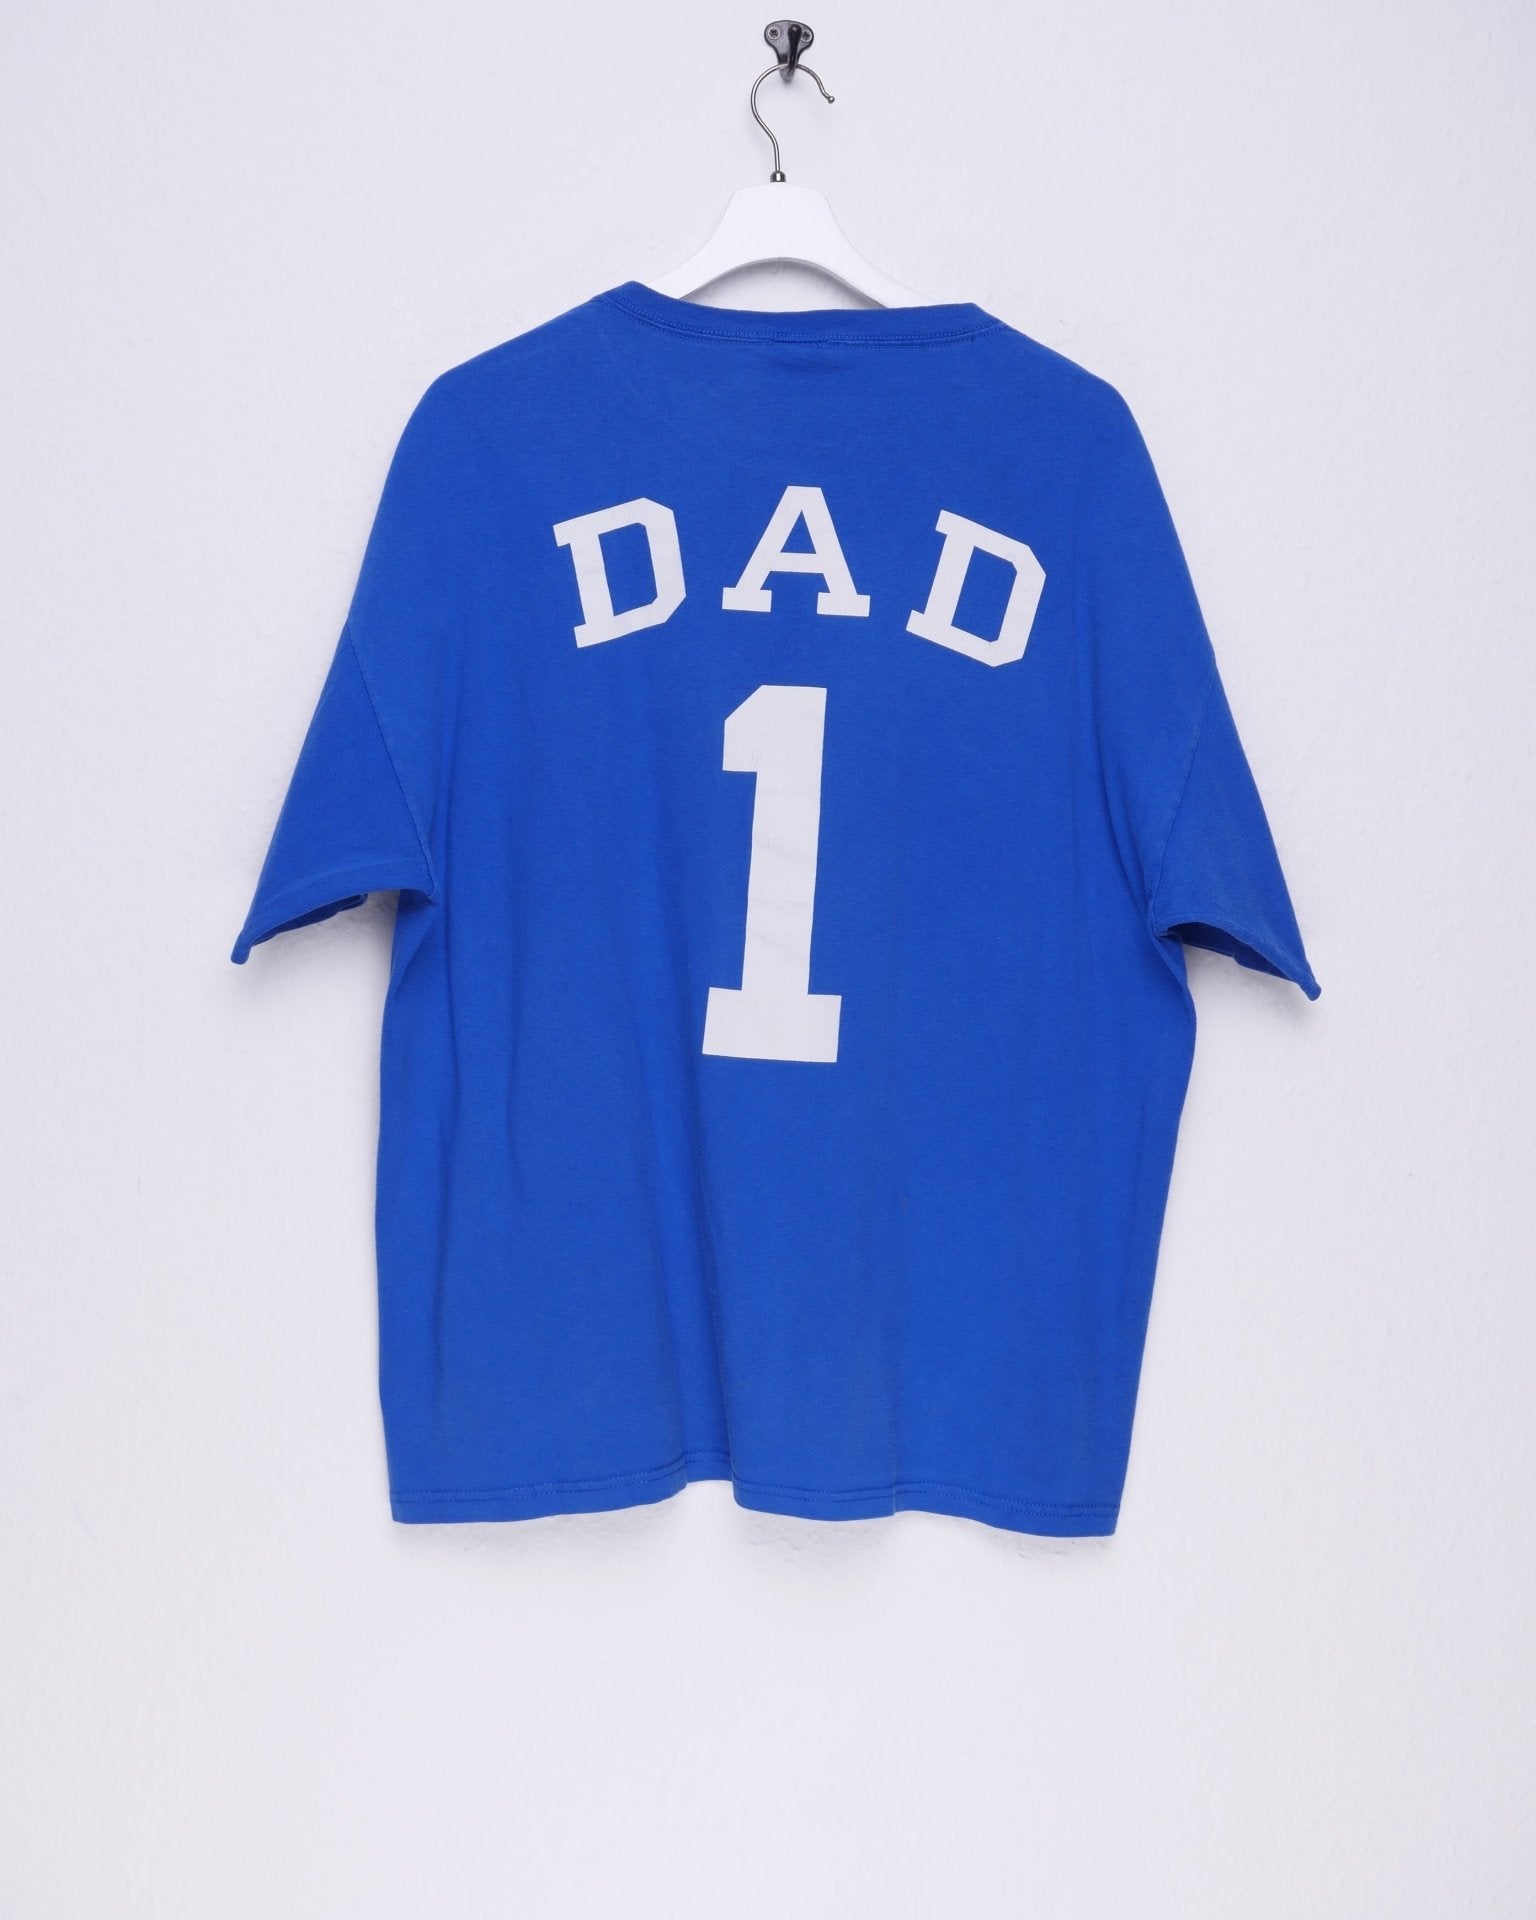 nfl 'New York Giants' printed Spellout blue Shirt - Peeces